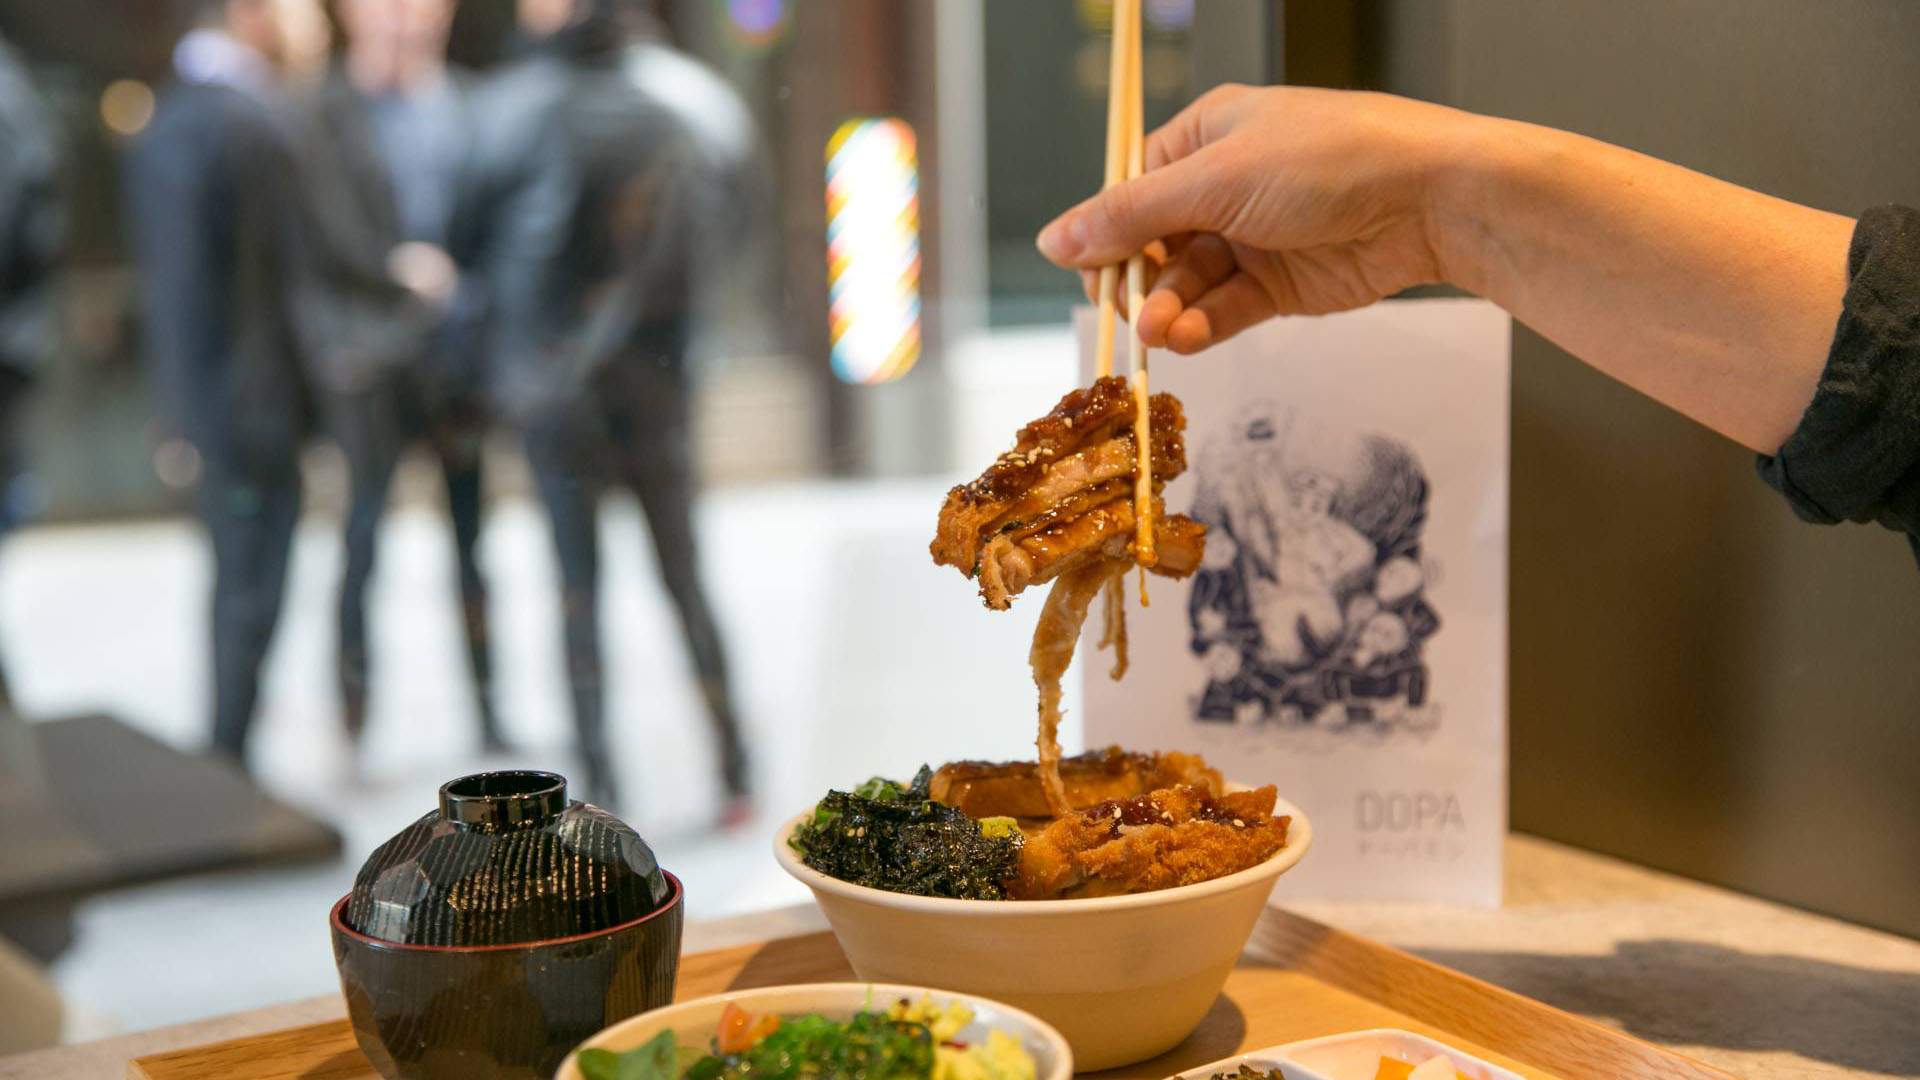 Now Open: The Devon Cafe Crew Have Hit Bondi Junction with a New Japanese Rice Bowl Joint